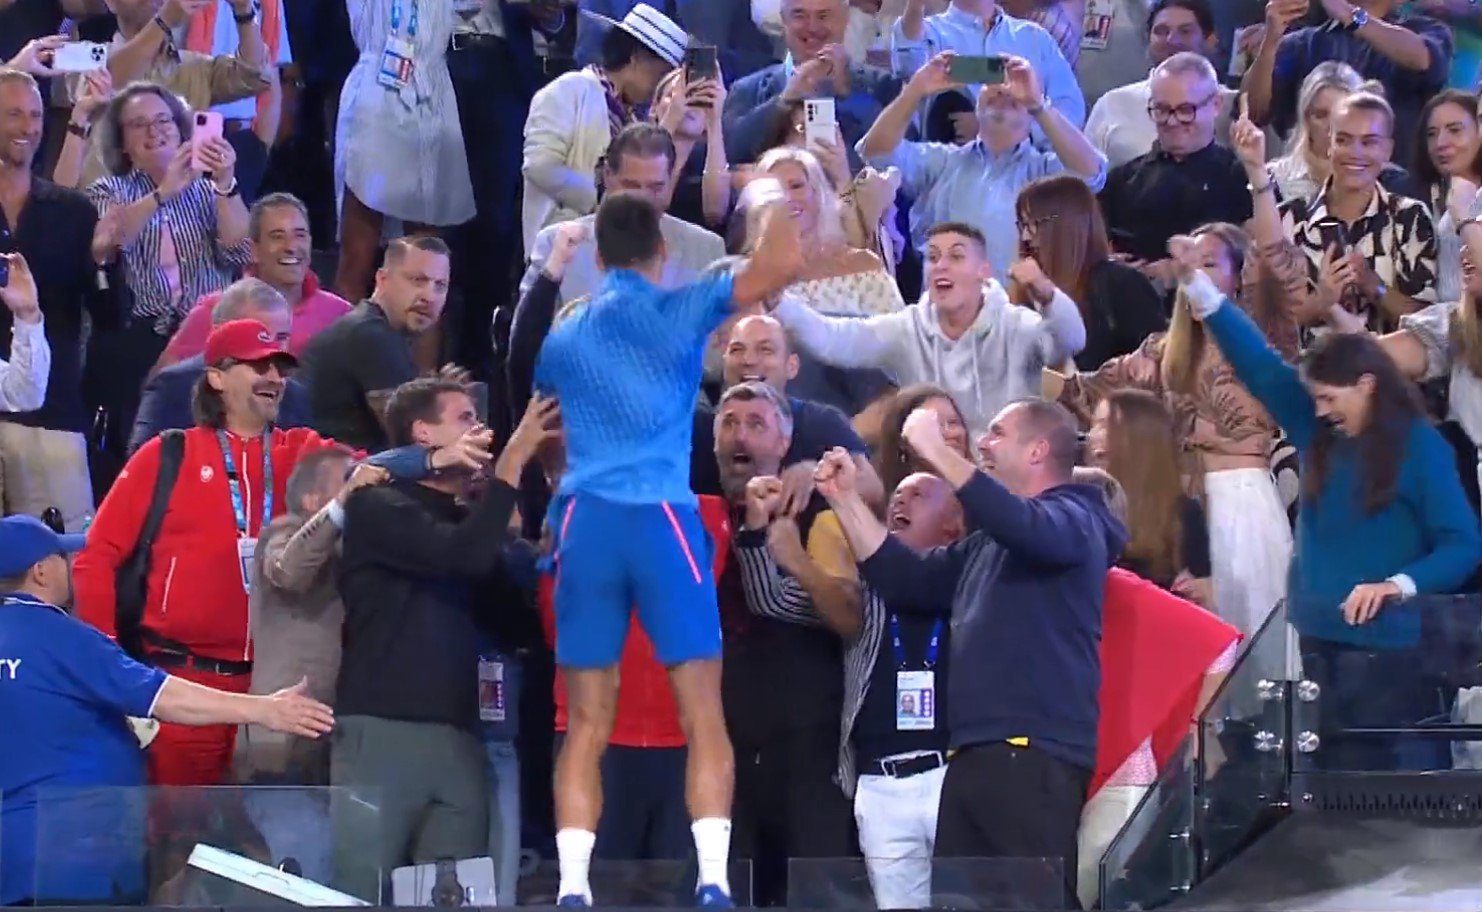 epic!-novak-djokovic-breaks-down-and-cries-after-winning-10th-australian-open-–-a-year-after-being-banned-from-australia-for-refusing-big-pharma’s-vax-(video)